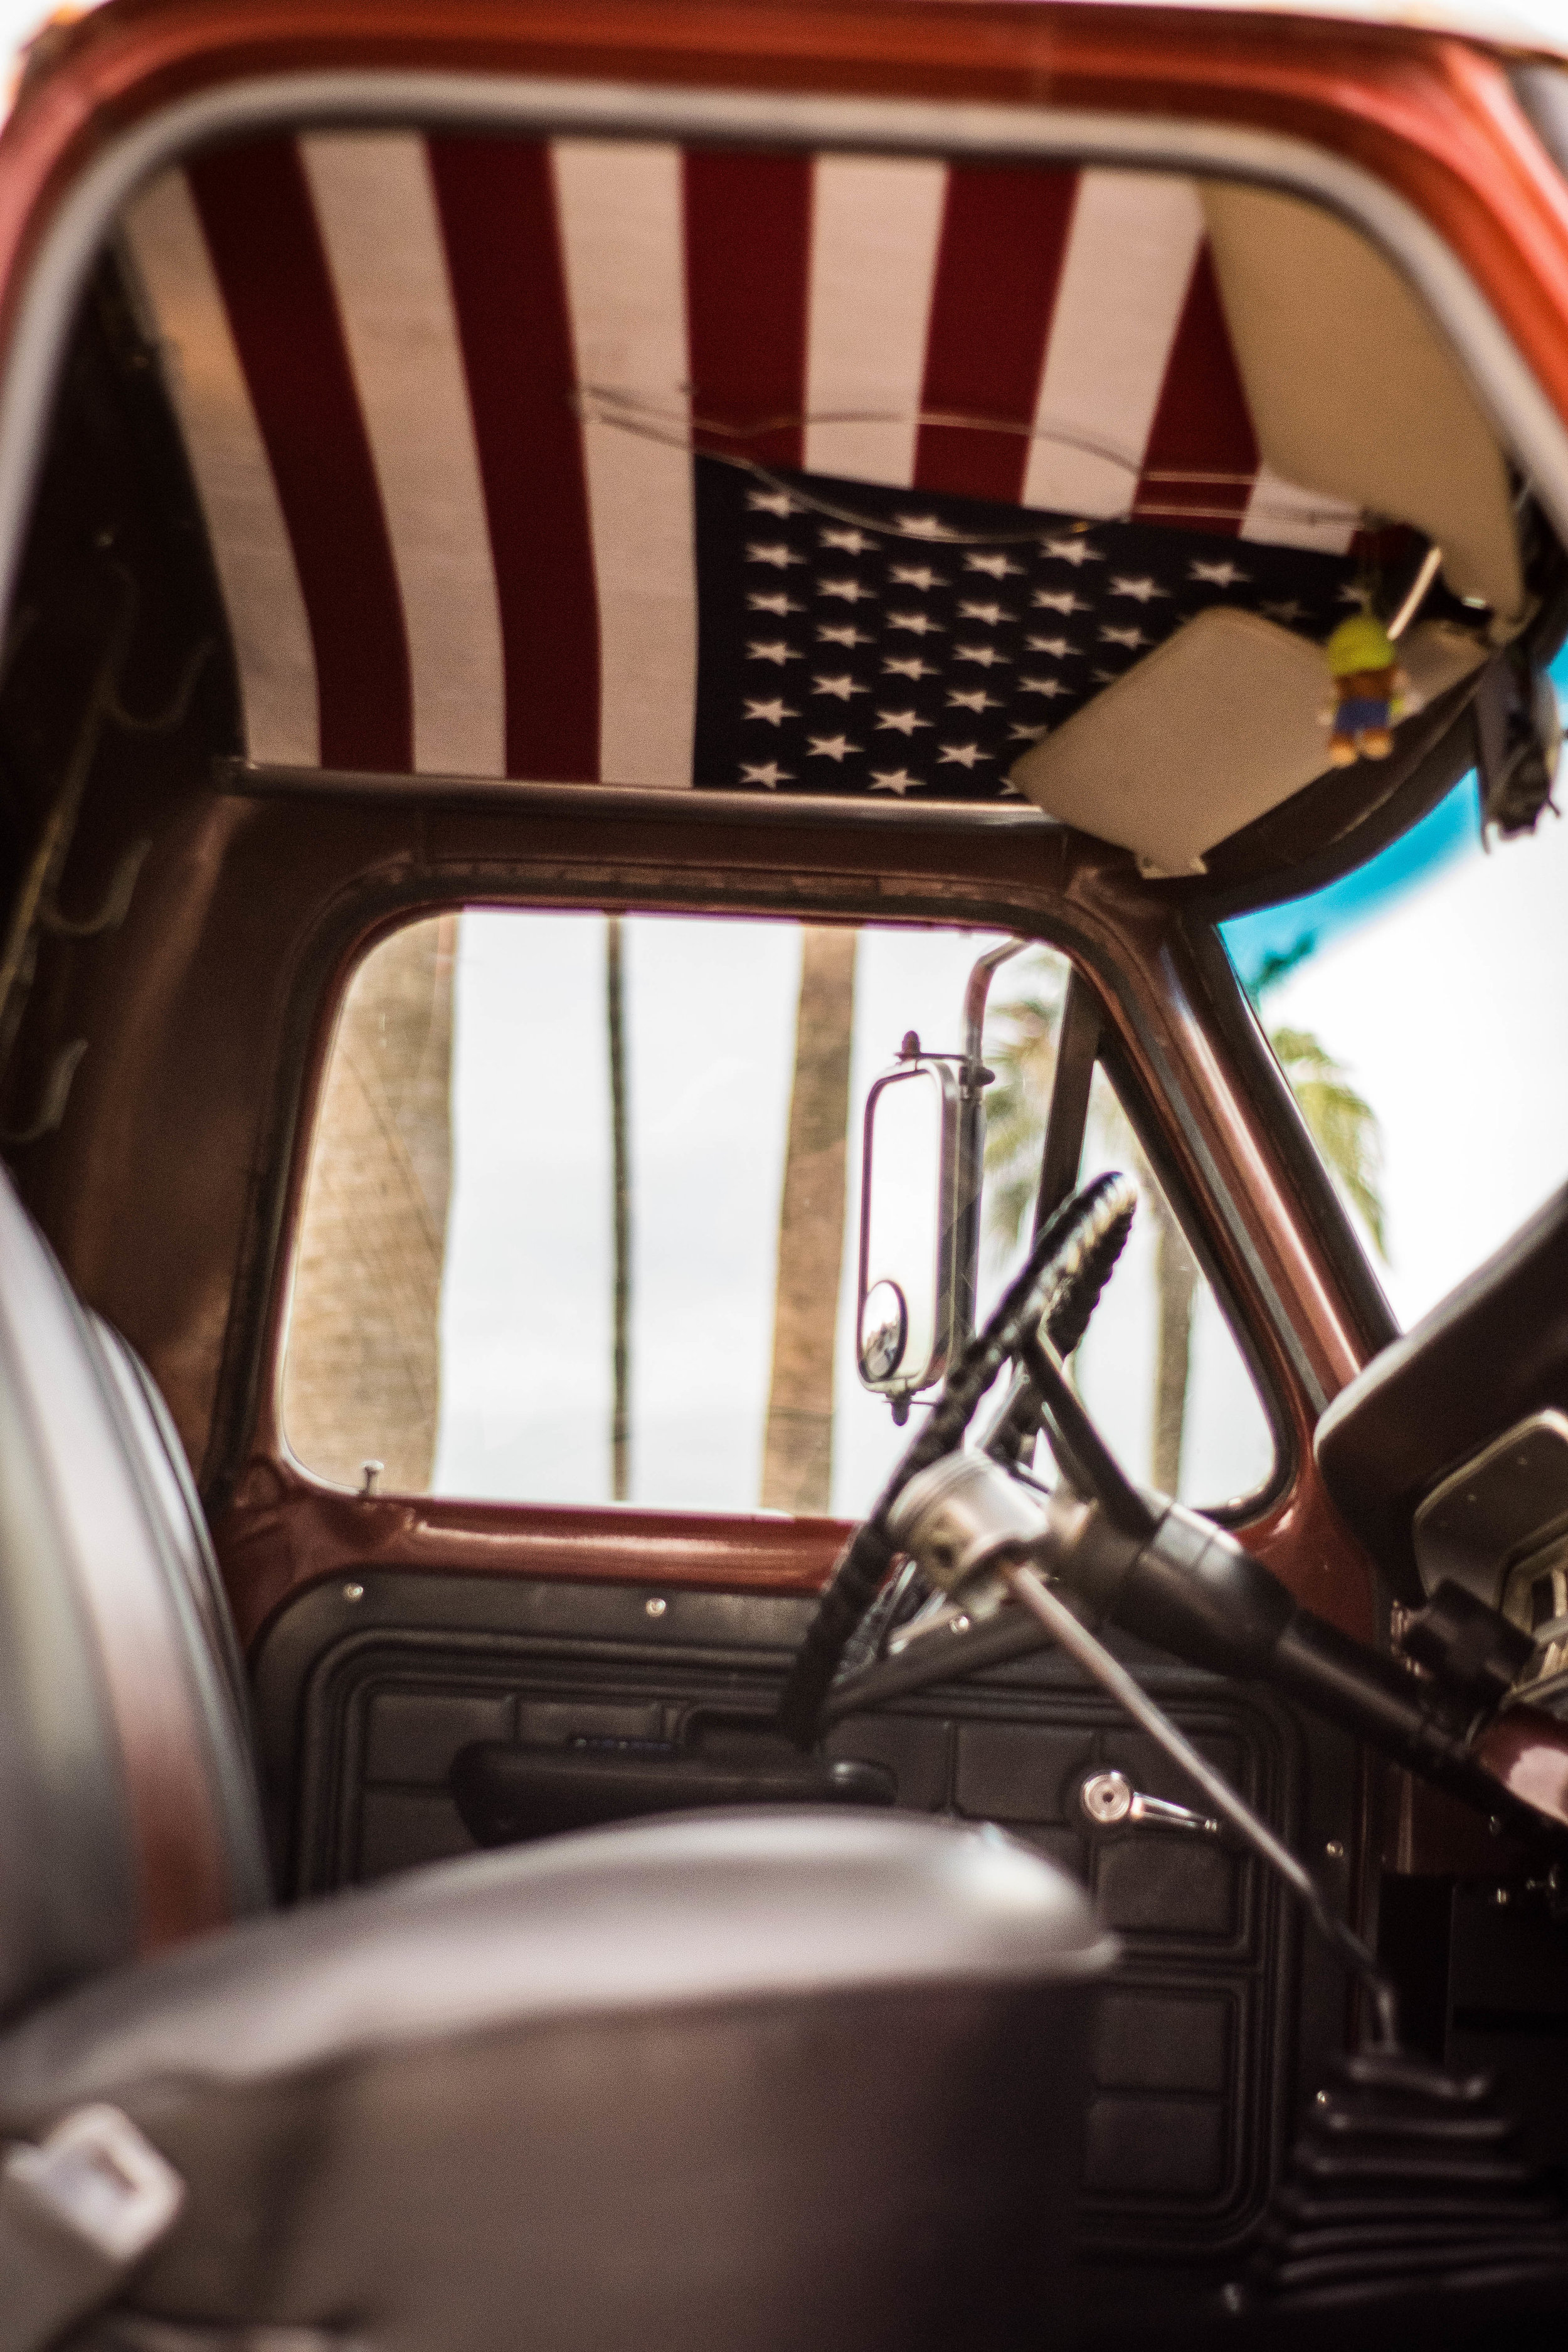  When insulating the cab, I decided to put Dynamatt on the roof as well. While the headliner was out I thought, why not put old glory up there too.  